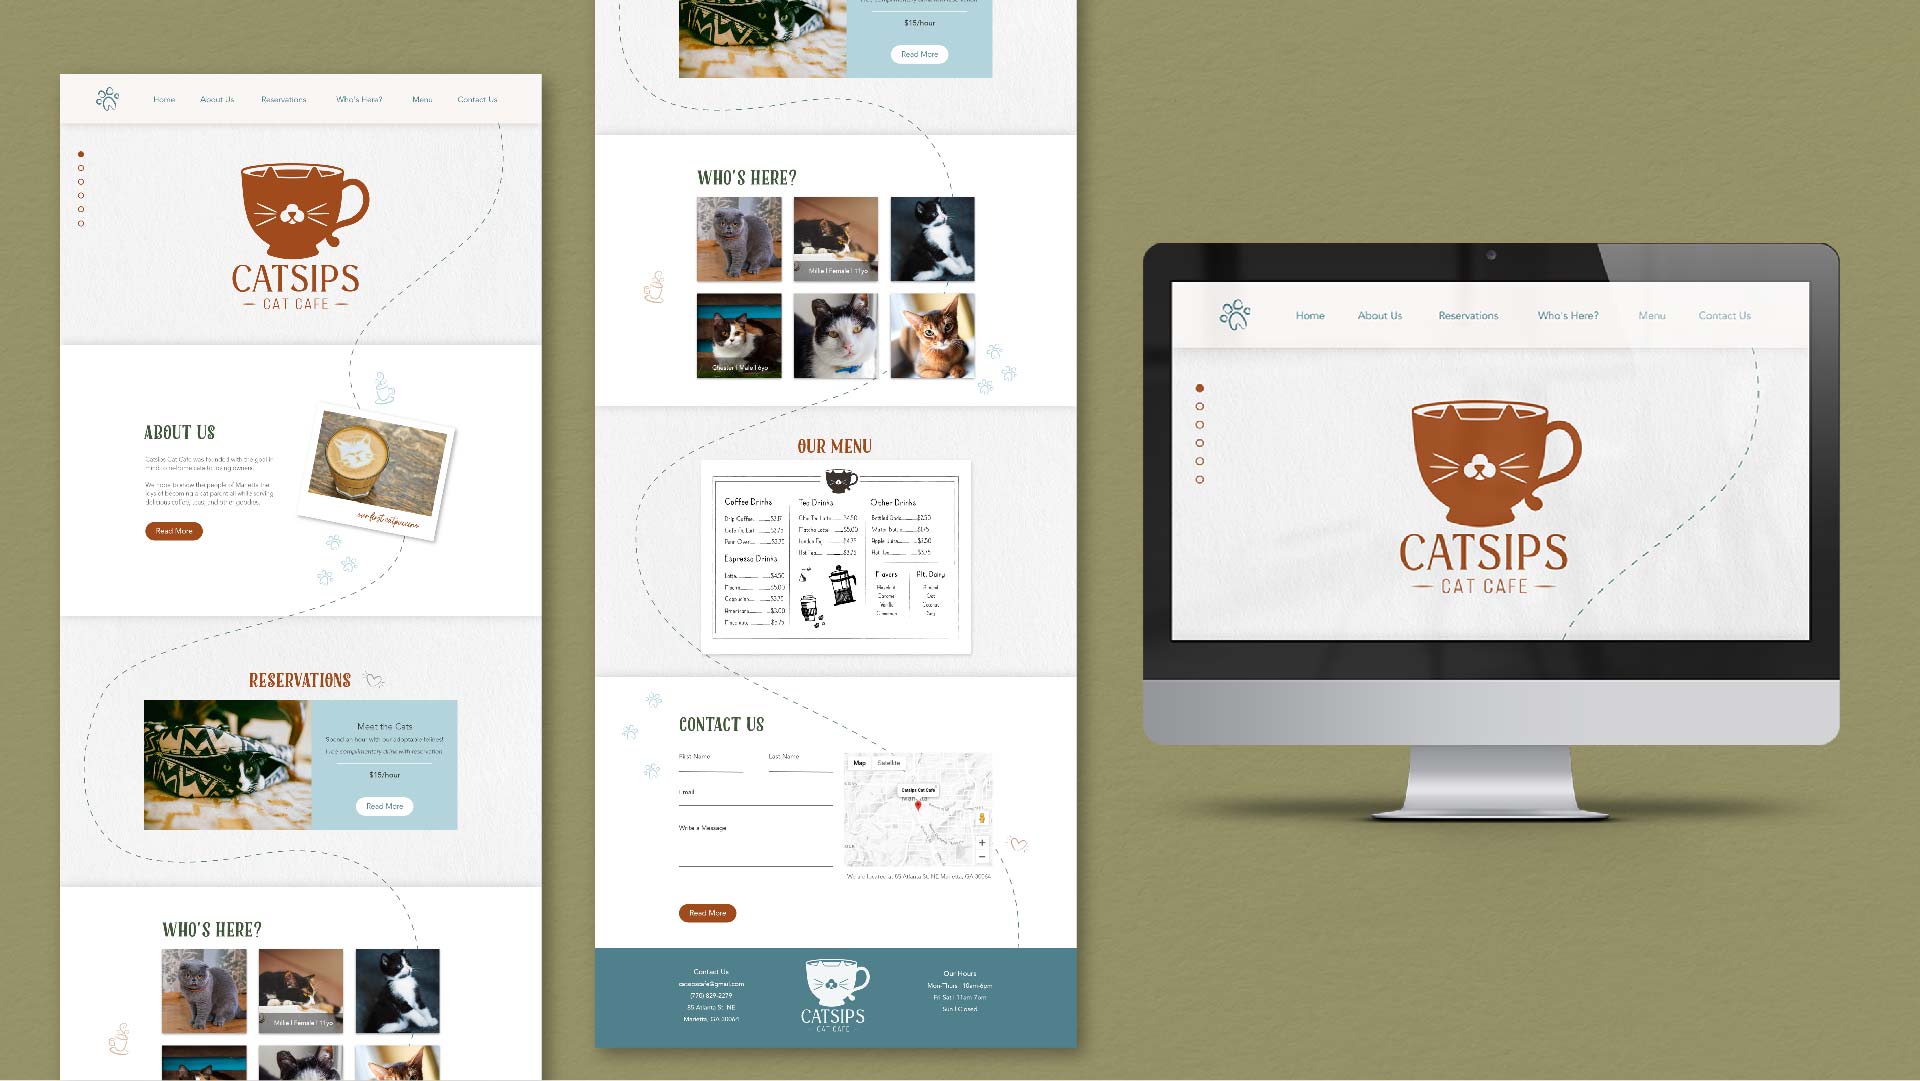 "Catsips Cat Cafe." / "Catsips Cat Cafe." Branding & Desktop Site 1920x1080 pixels, digital 2021. The website helps enforce the Catsips Cat Cafe’s brand by using a simple layout with hand-illustrated designs—bringing this cat cafe to life.